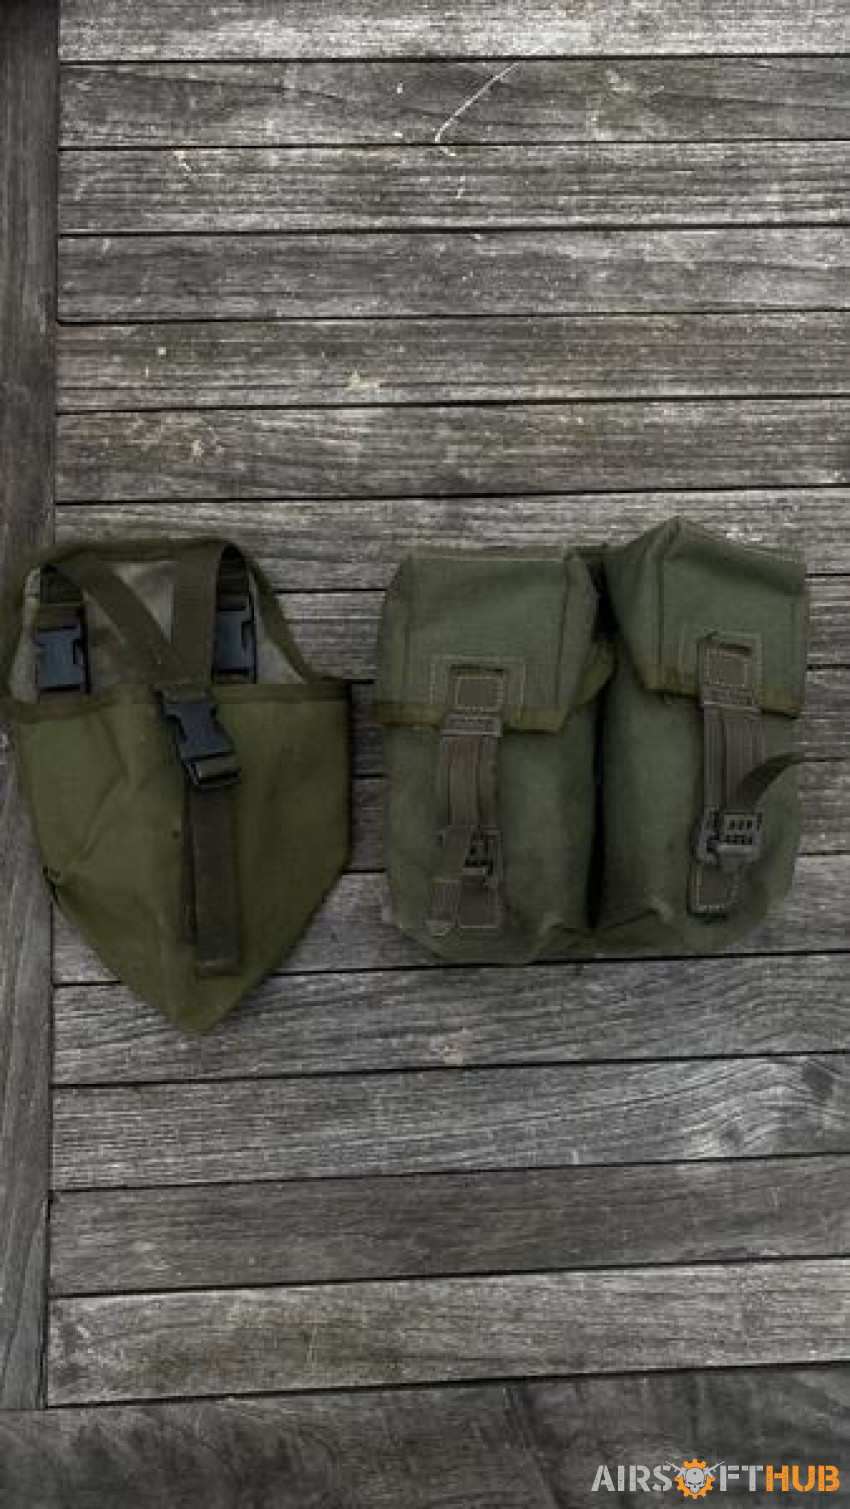 British army Olive green pouch - Used airsoft equipment